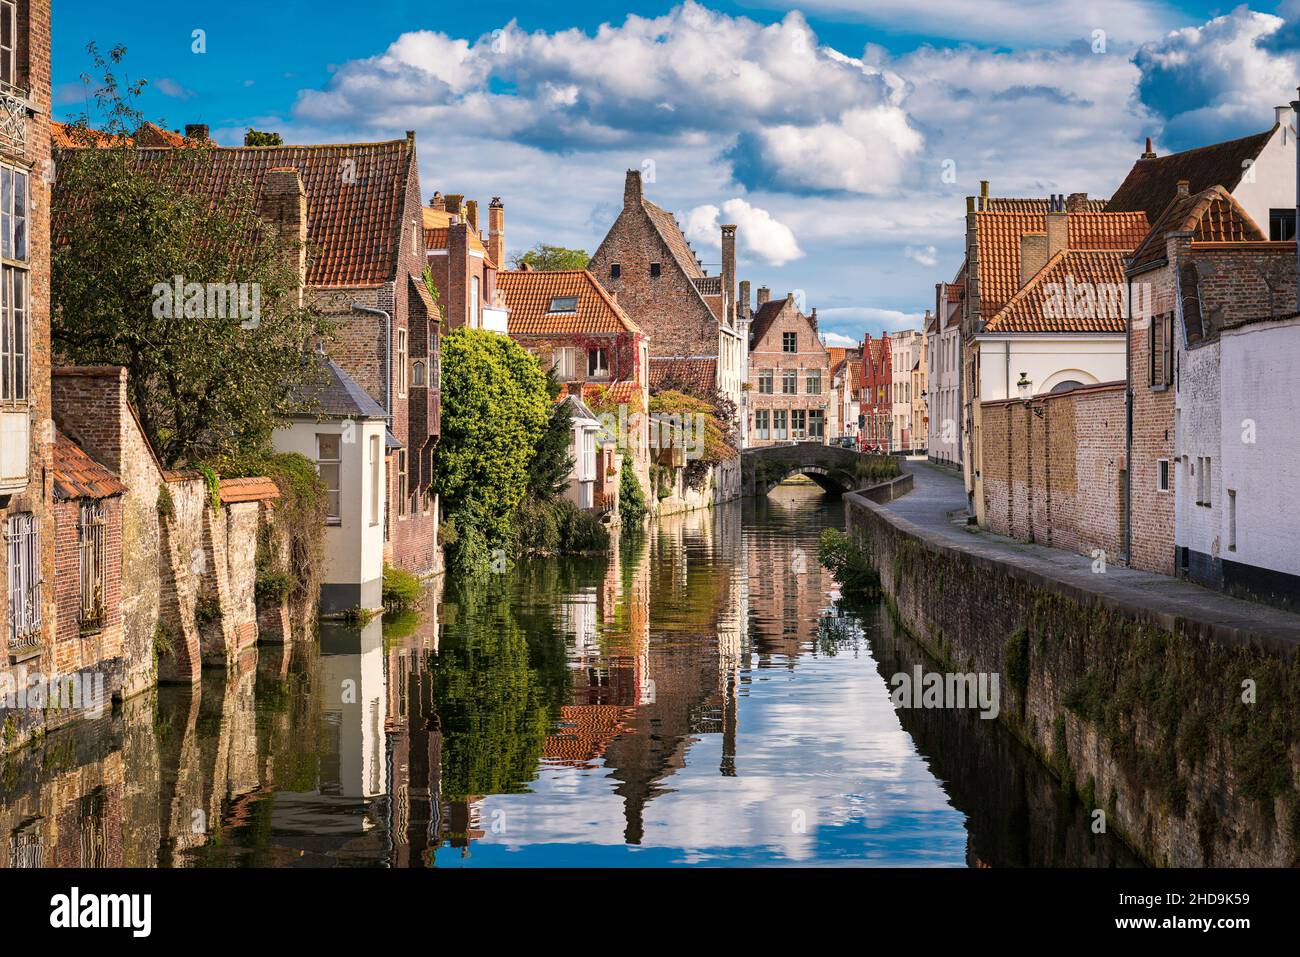 Historic city of Bruges, Belgium on a sunny day Stock Photo